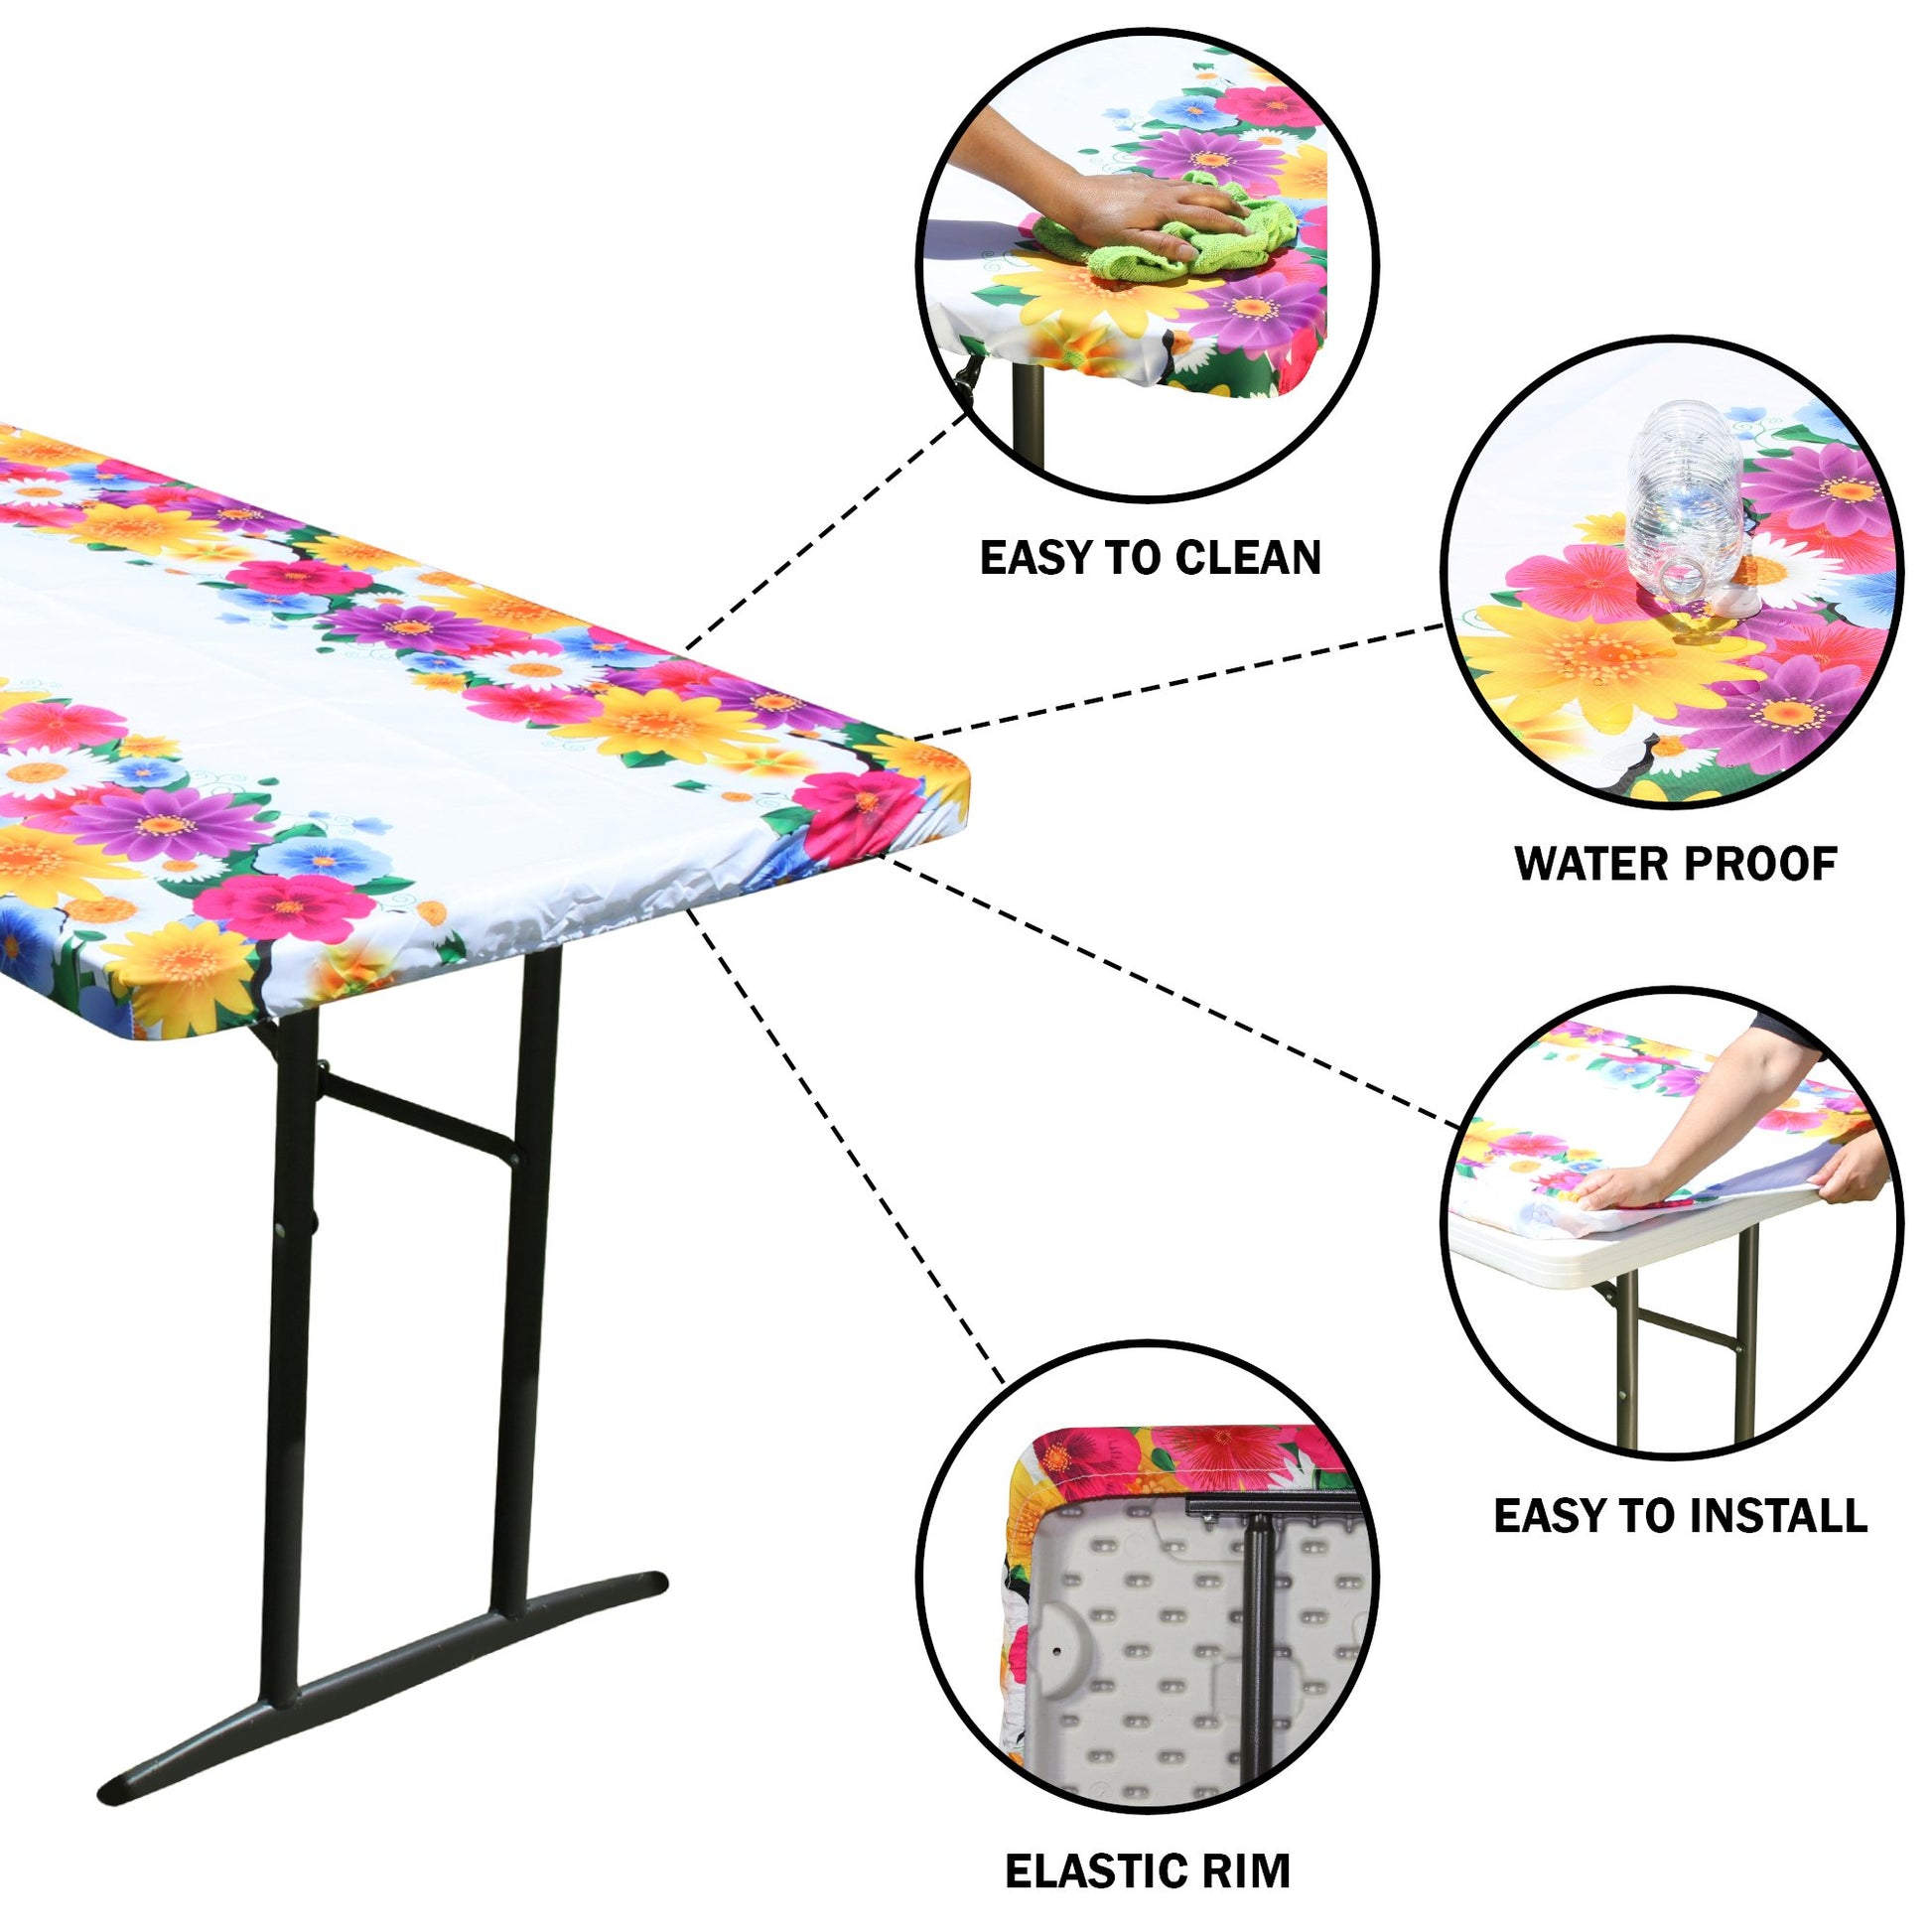 TableCloth PLUS 72" Spring Fitted Polyester Tablecloth for 6' Folding Tables is easy to clean, water proof, easy to install, and has an elastic rim